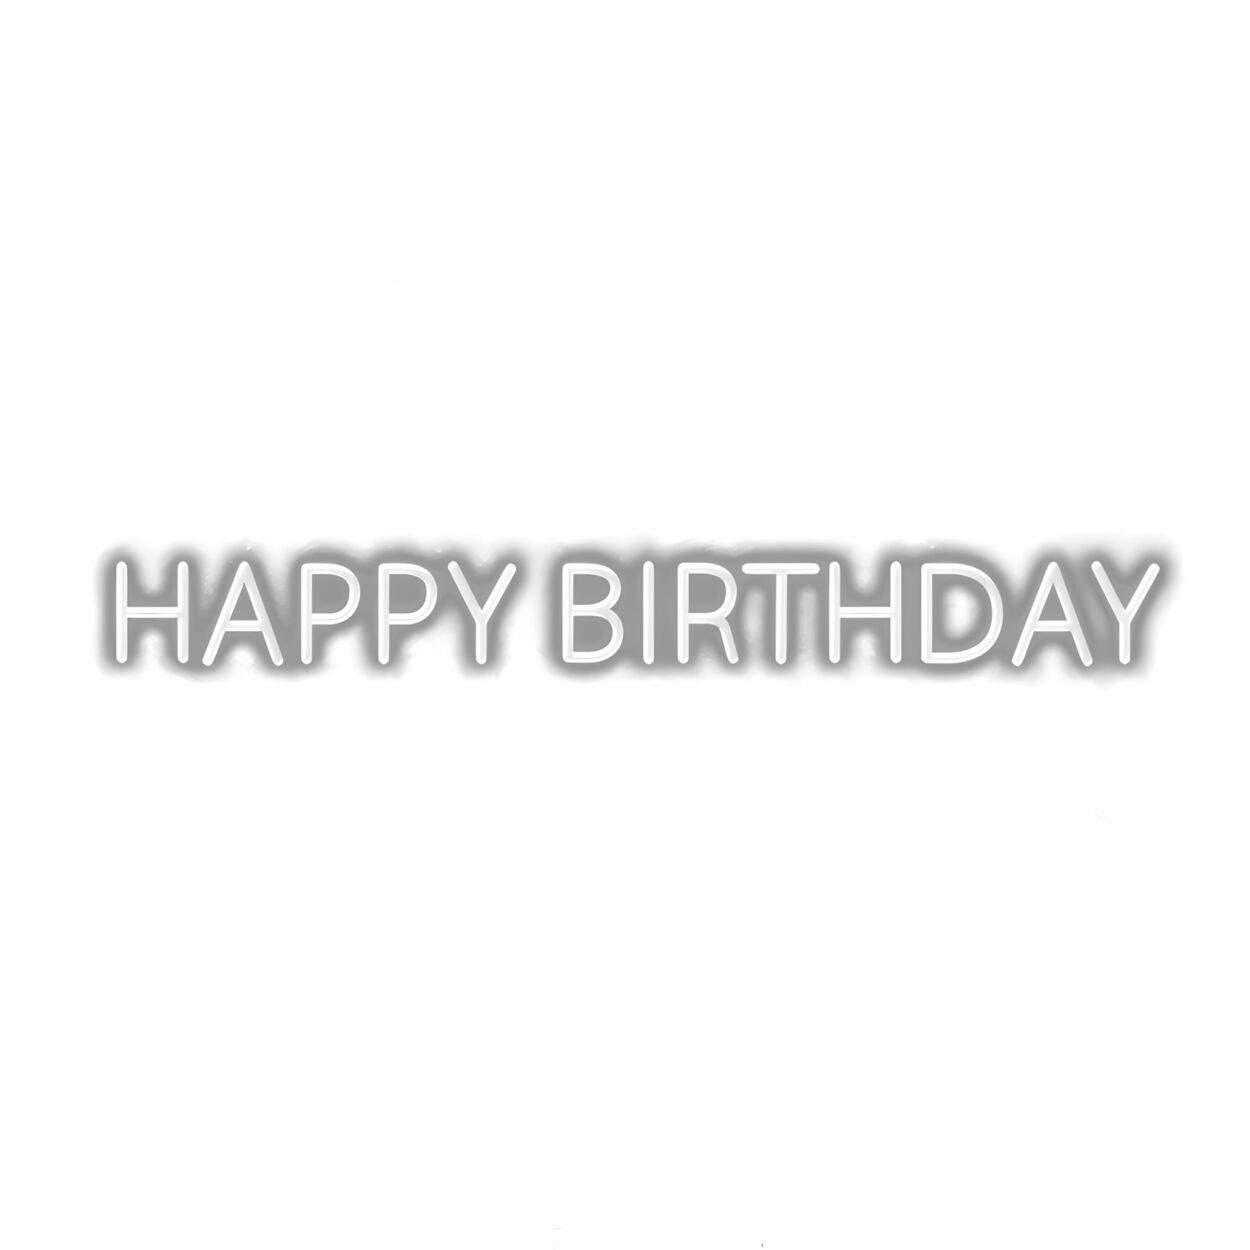 Embossed text saying 'Happy Birthday' on white background.